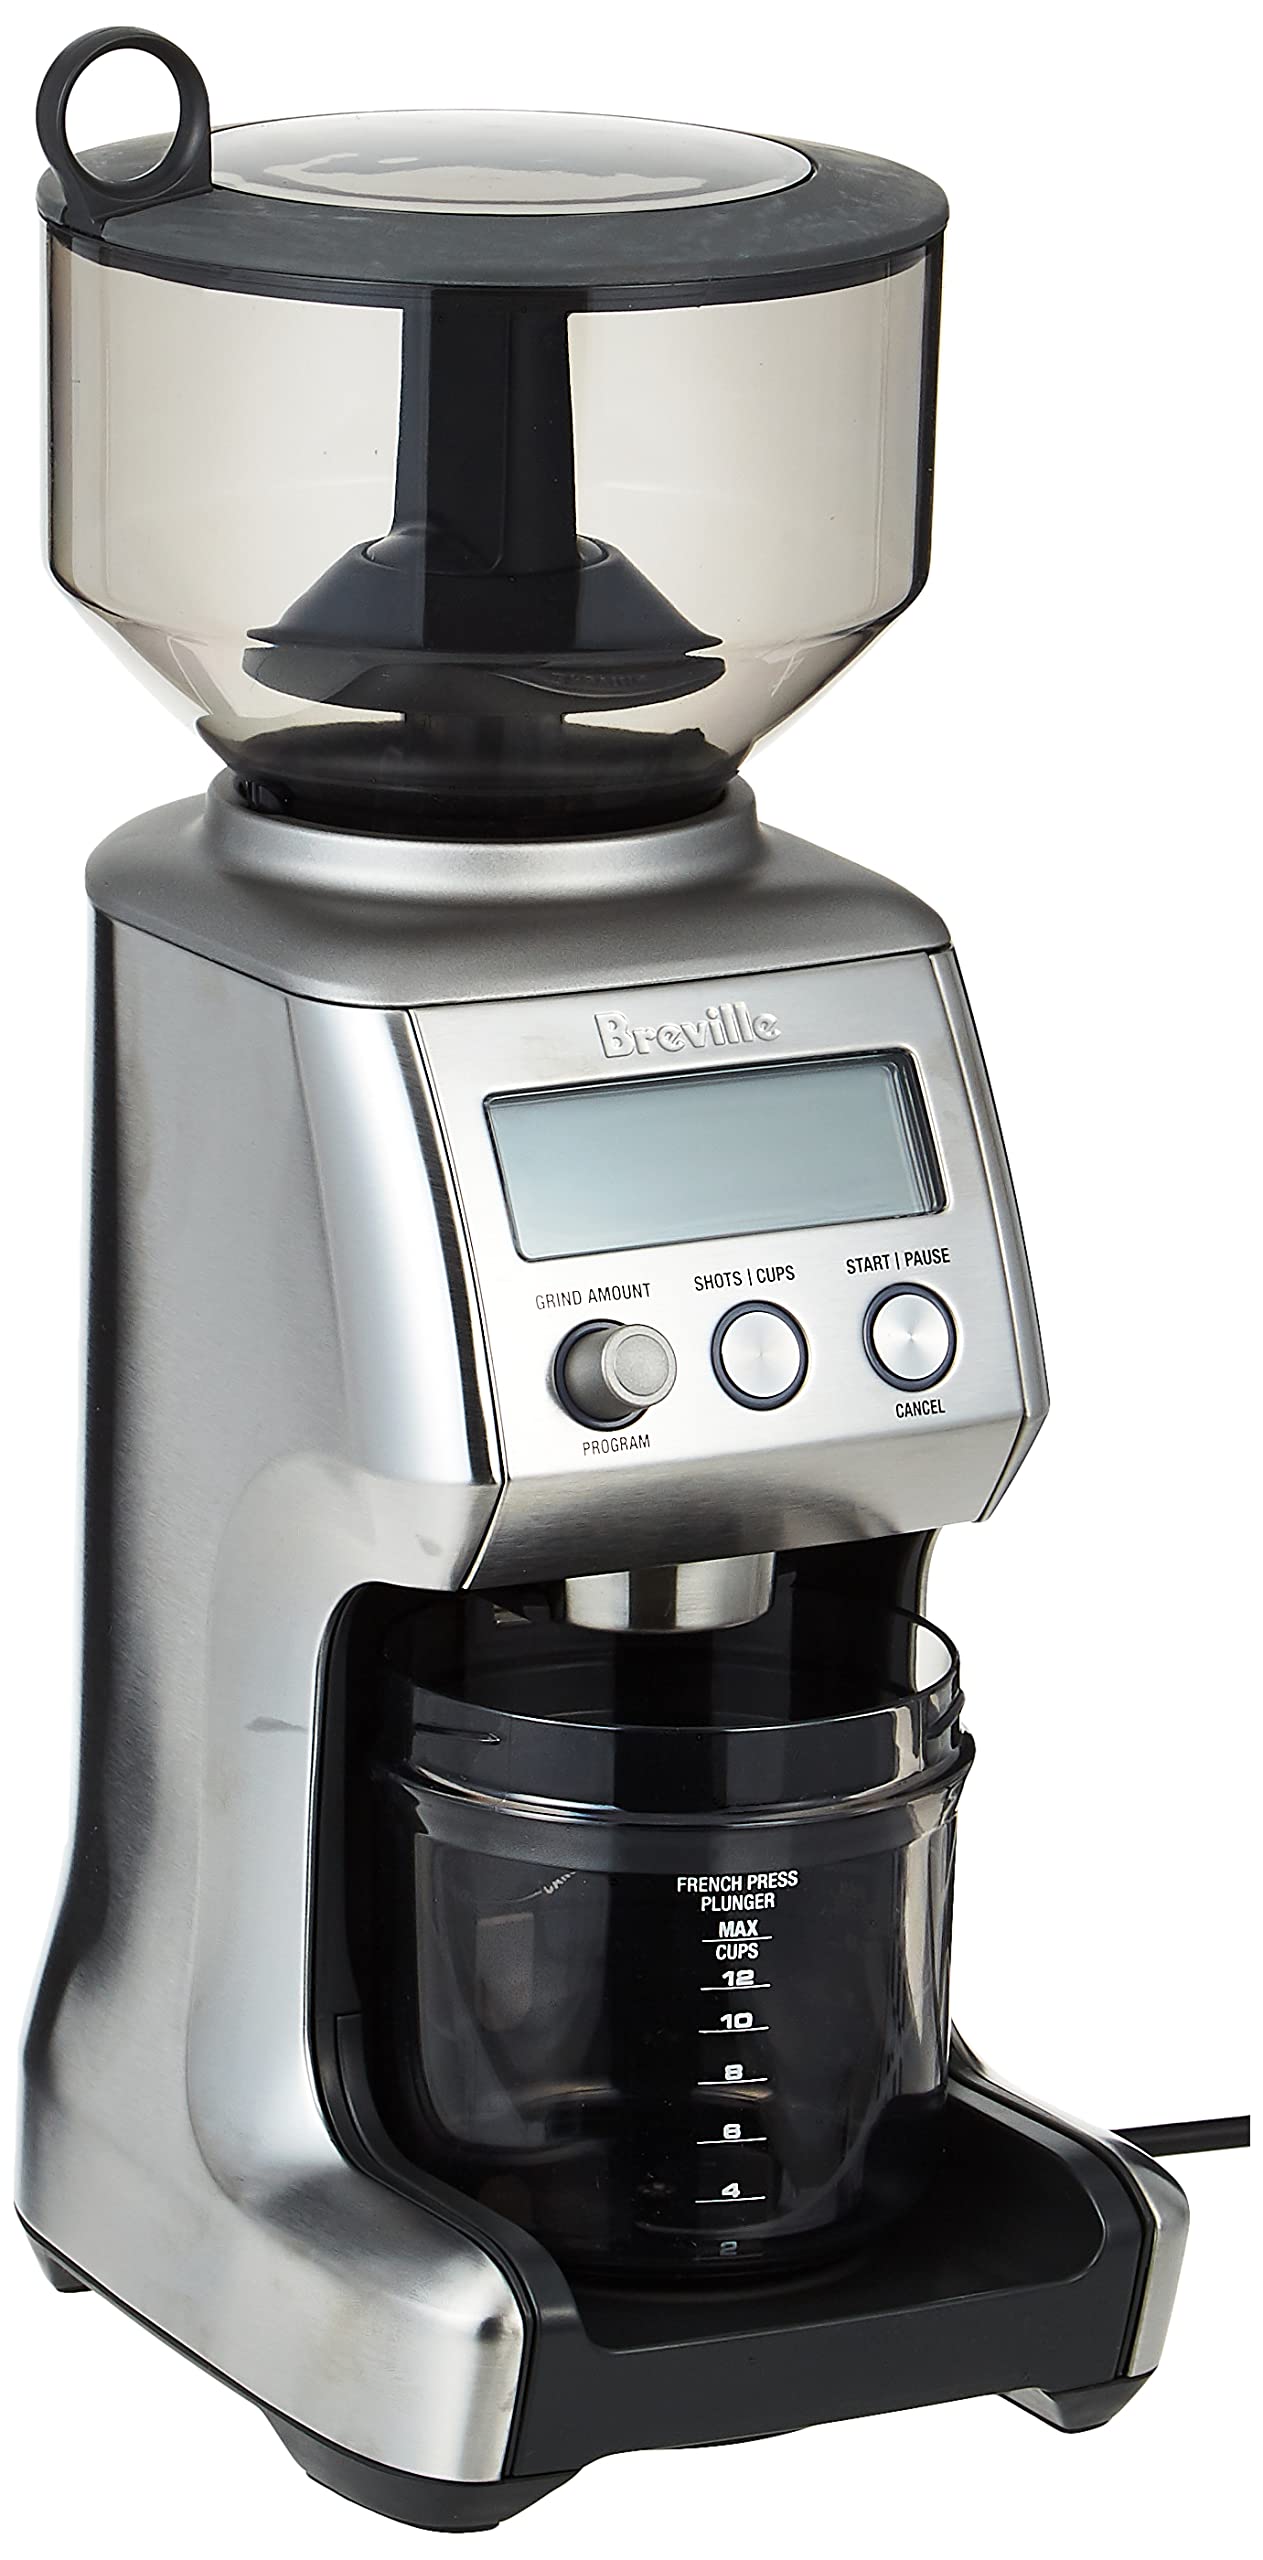 Breville The Smart Coffee Grinder Pro - BCG820, Silver and Black